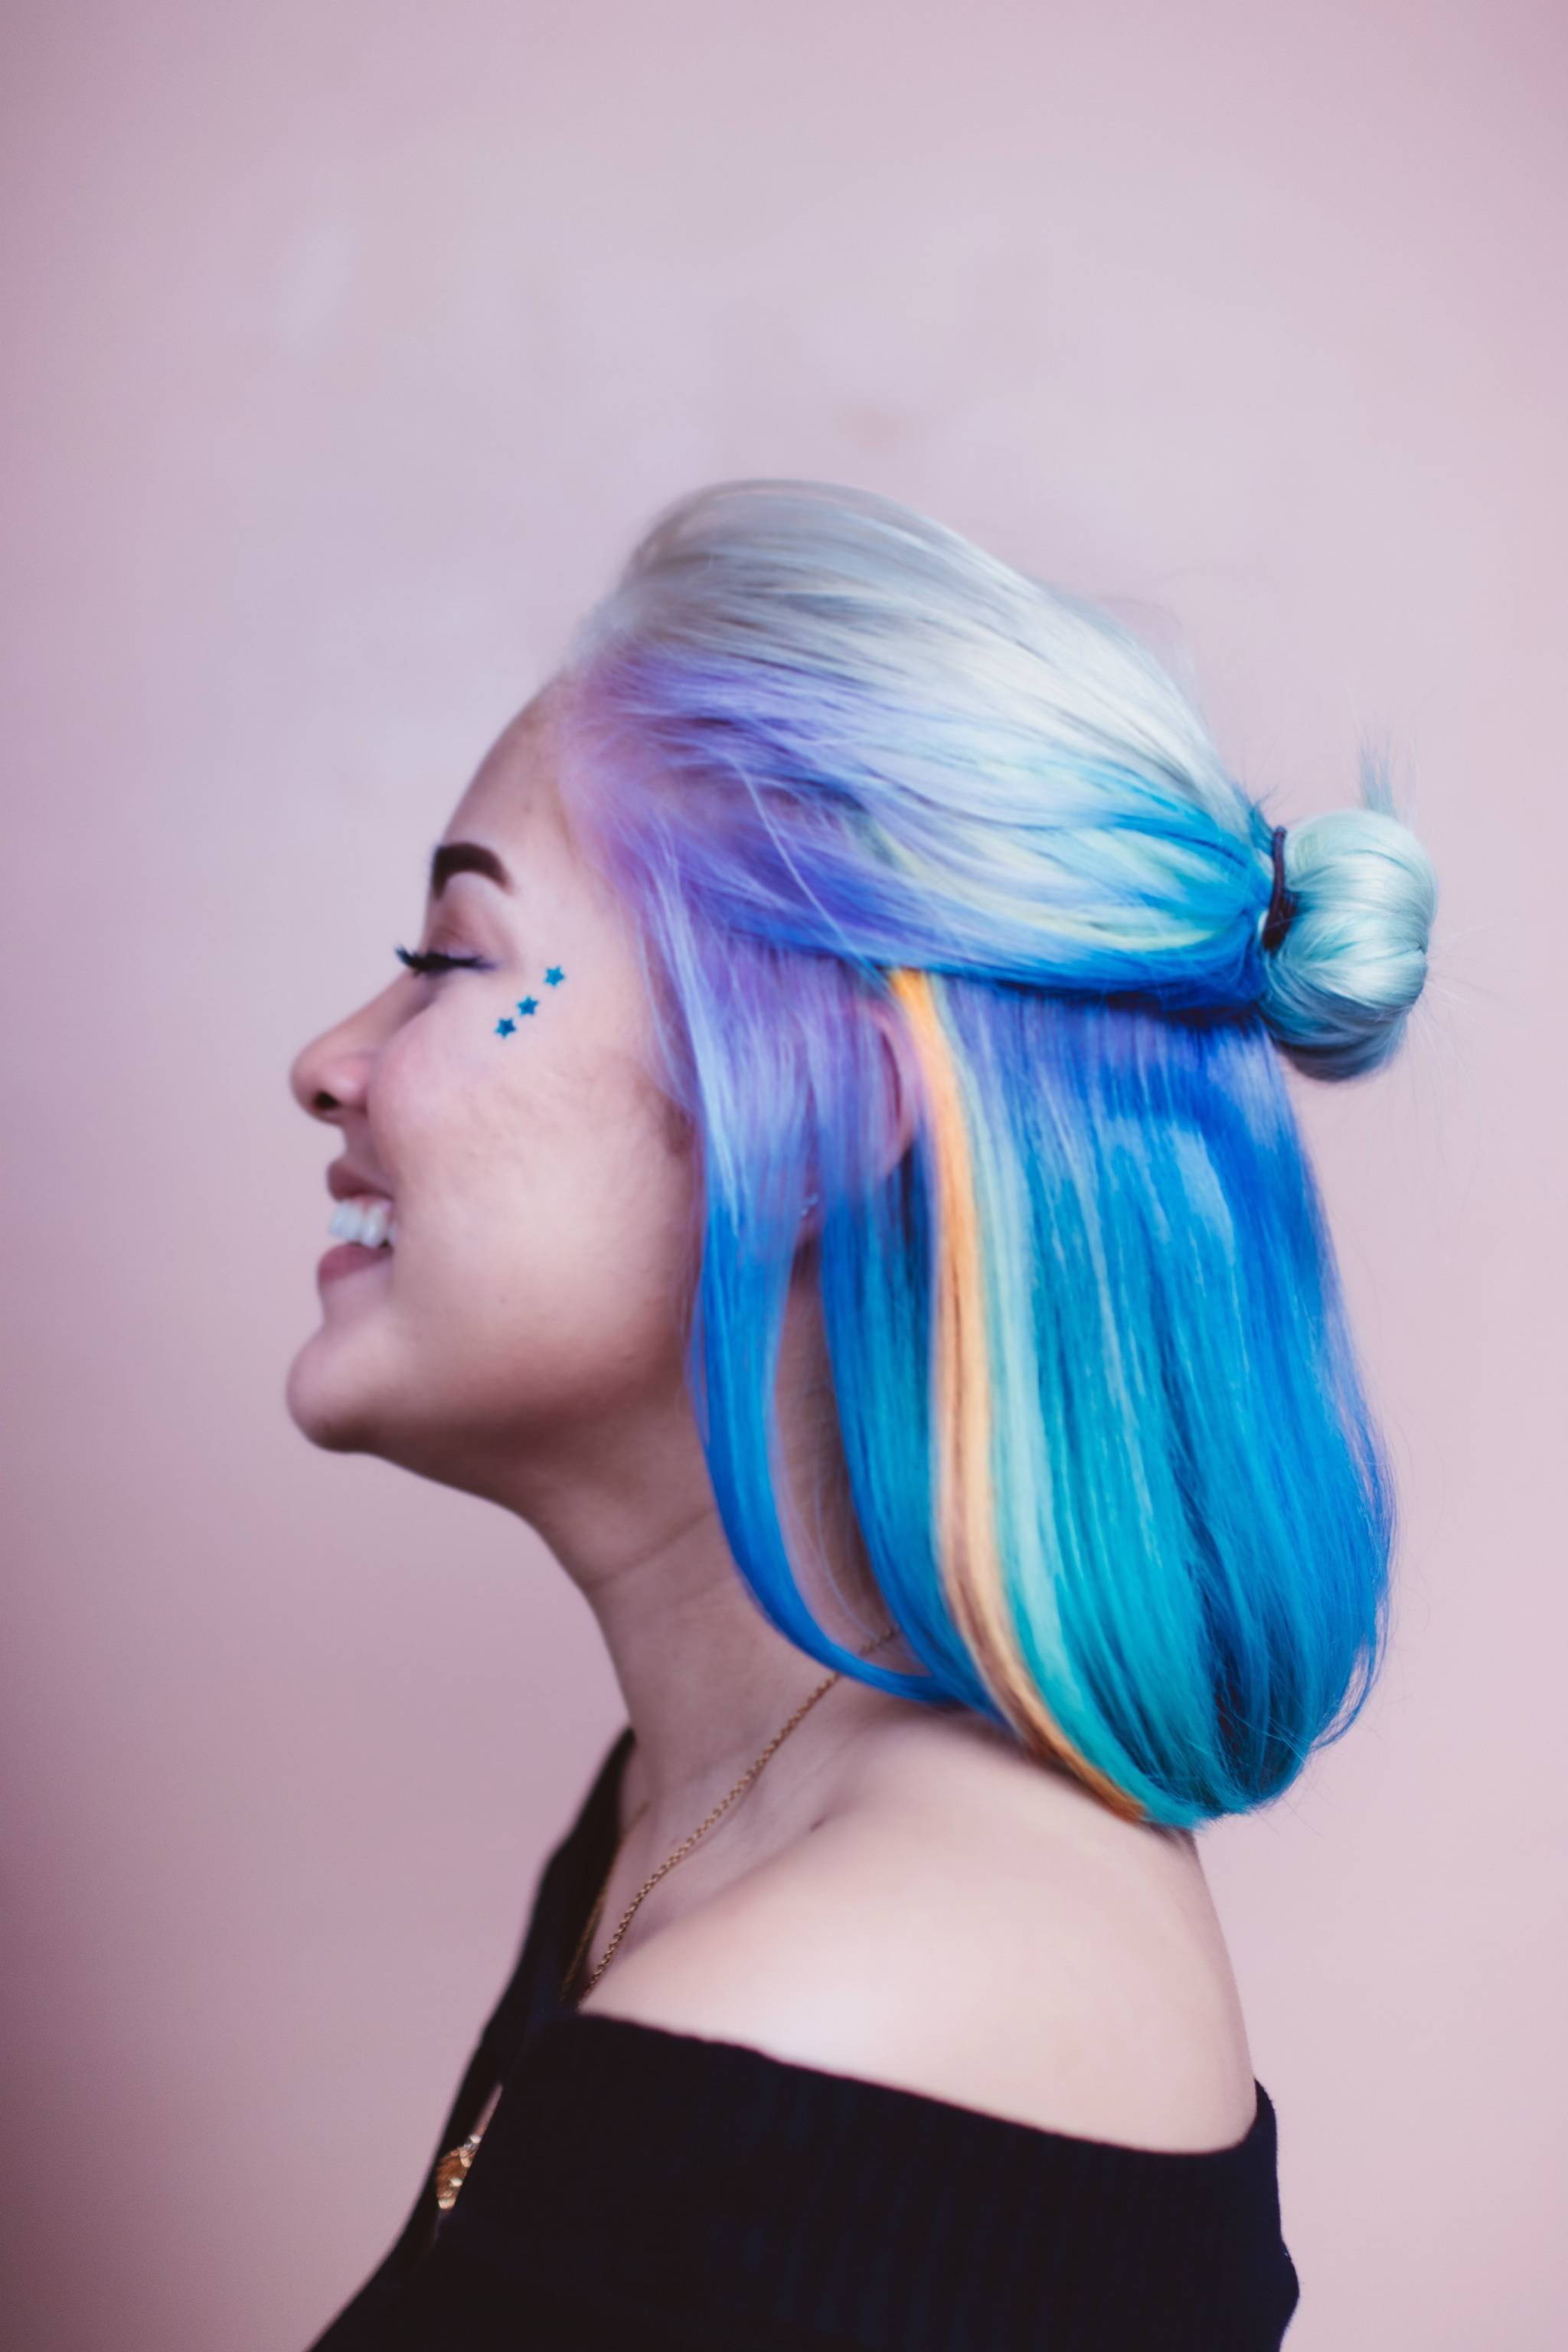 DIY haircuts give beauty fans an outlet for creativity